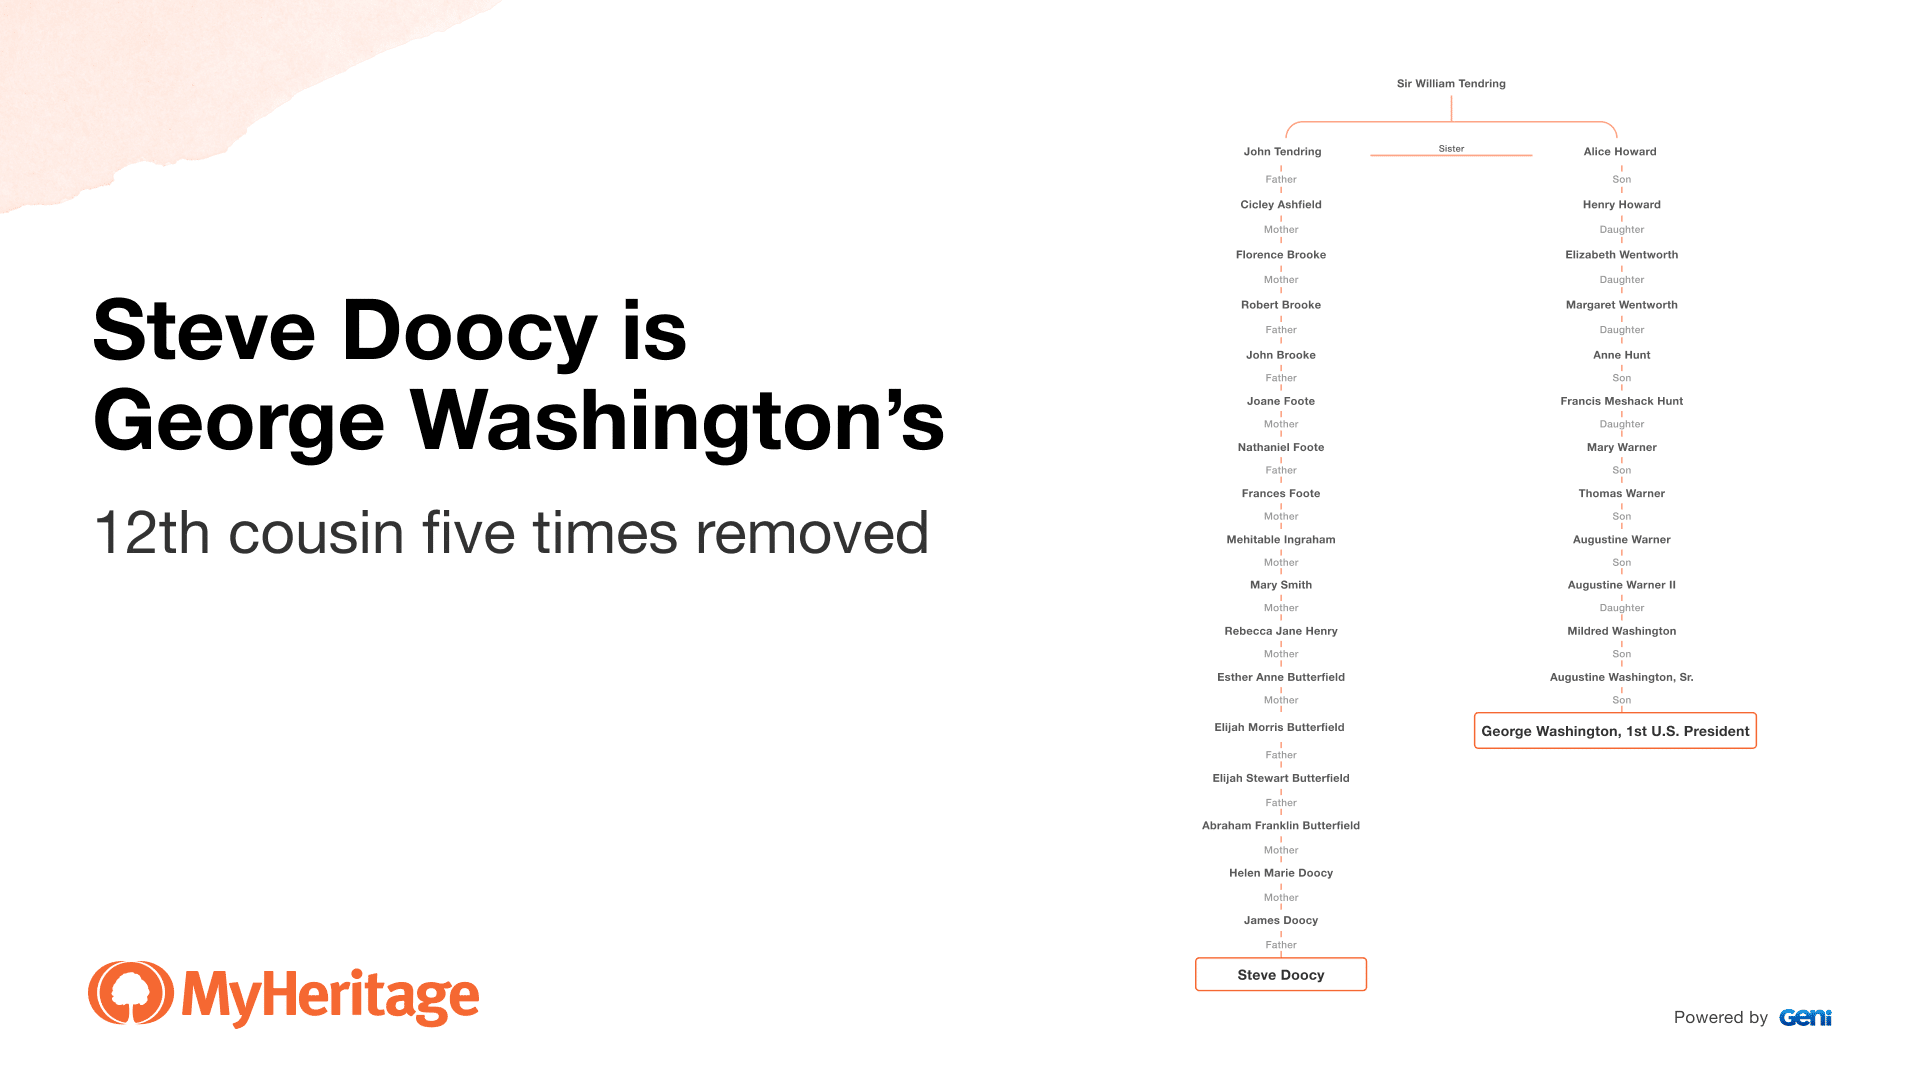 How Steve Doocy is related to George Washington (click to zoom)